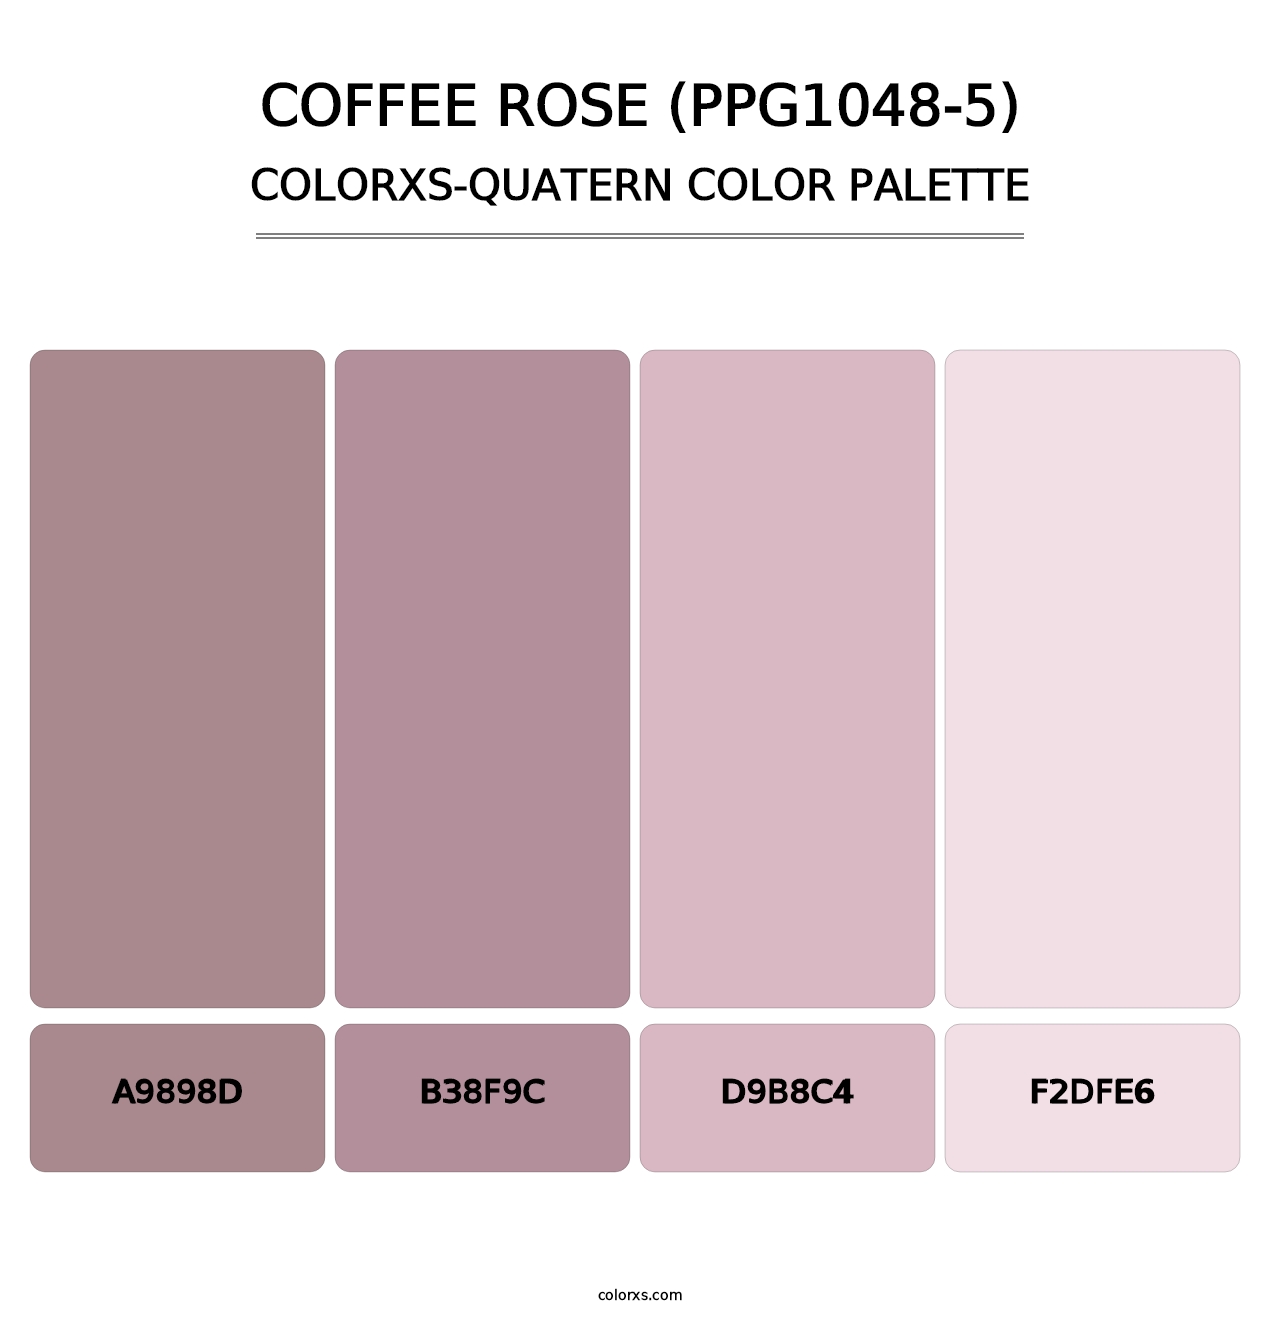 Coffee Rose (PPG1048-5) - Colorxs Quatern Palette